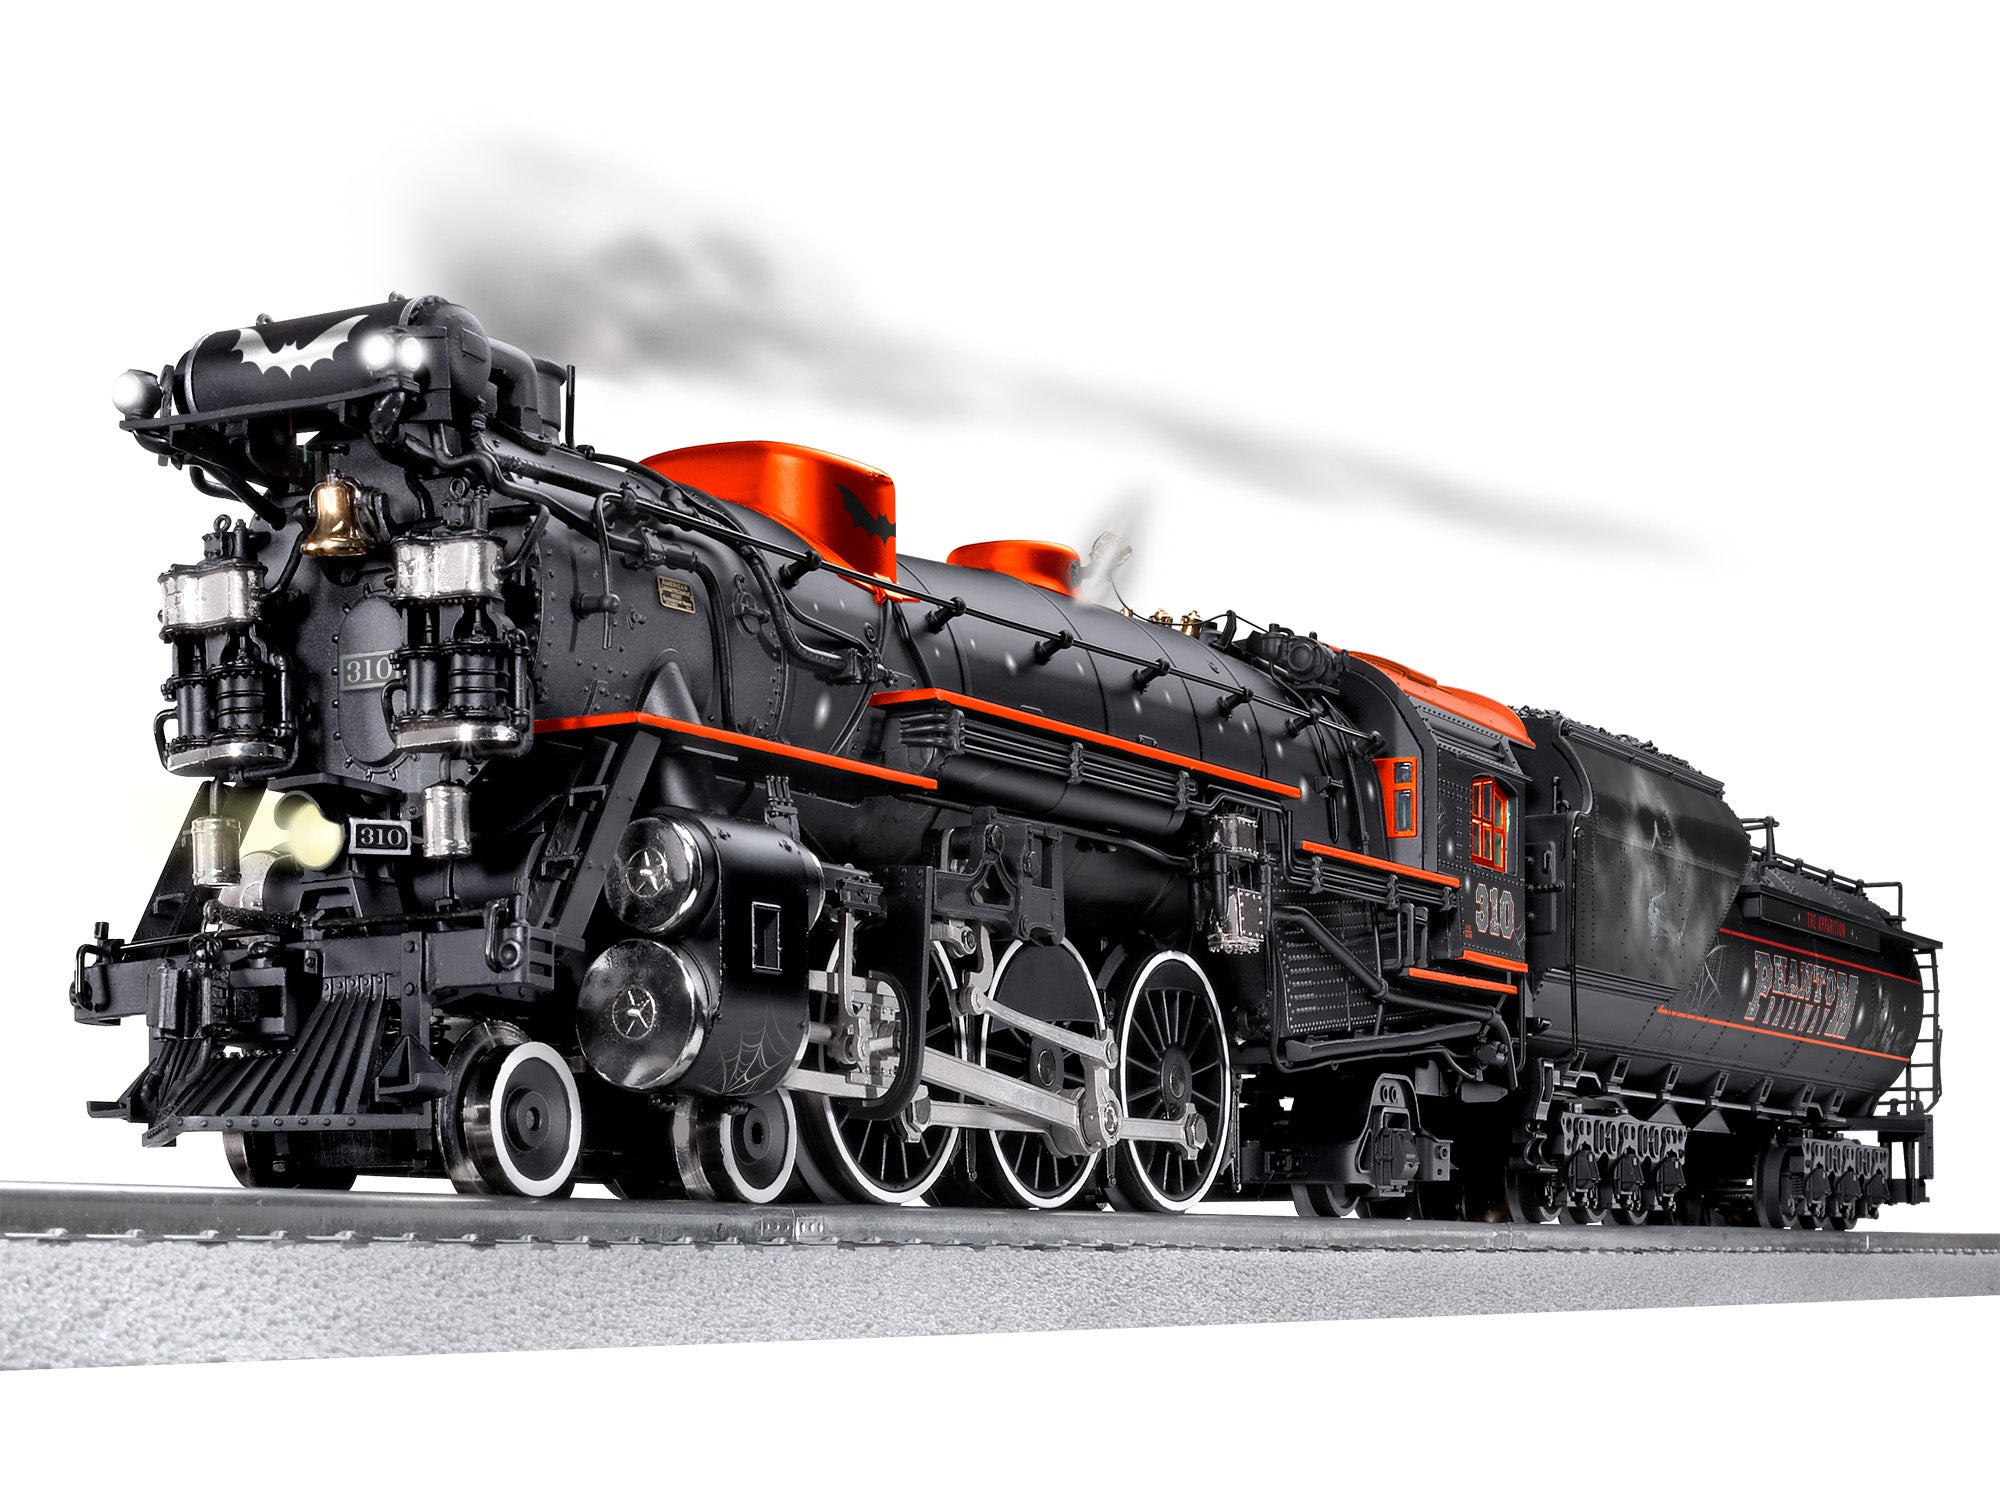 Lionel 2431170 - Legacy F19 Pacific Steam Engine "Halloween" #310